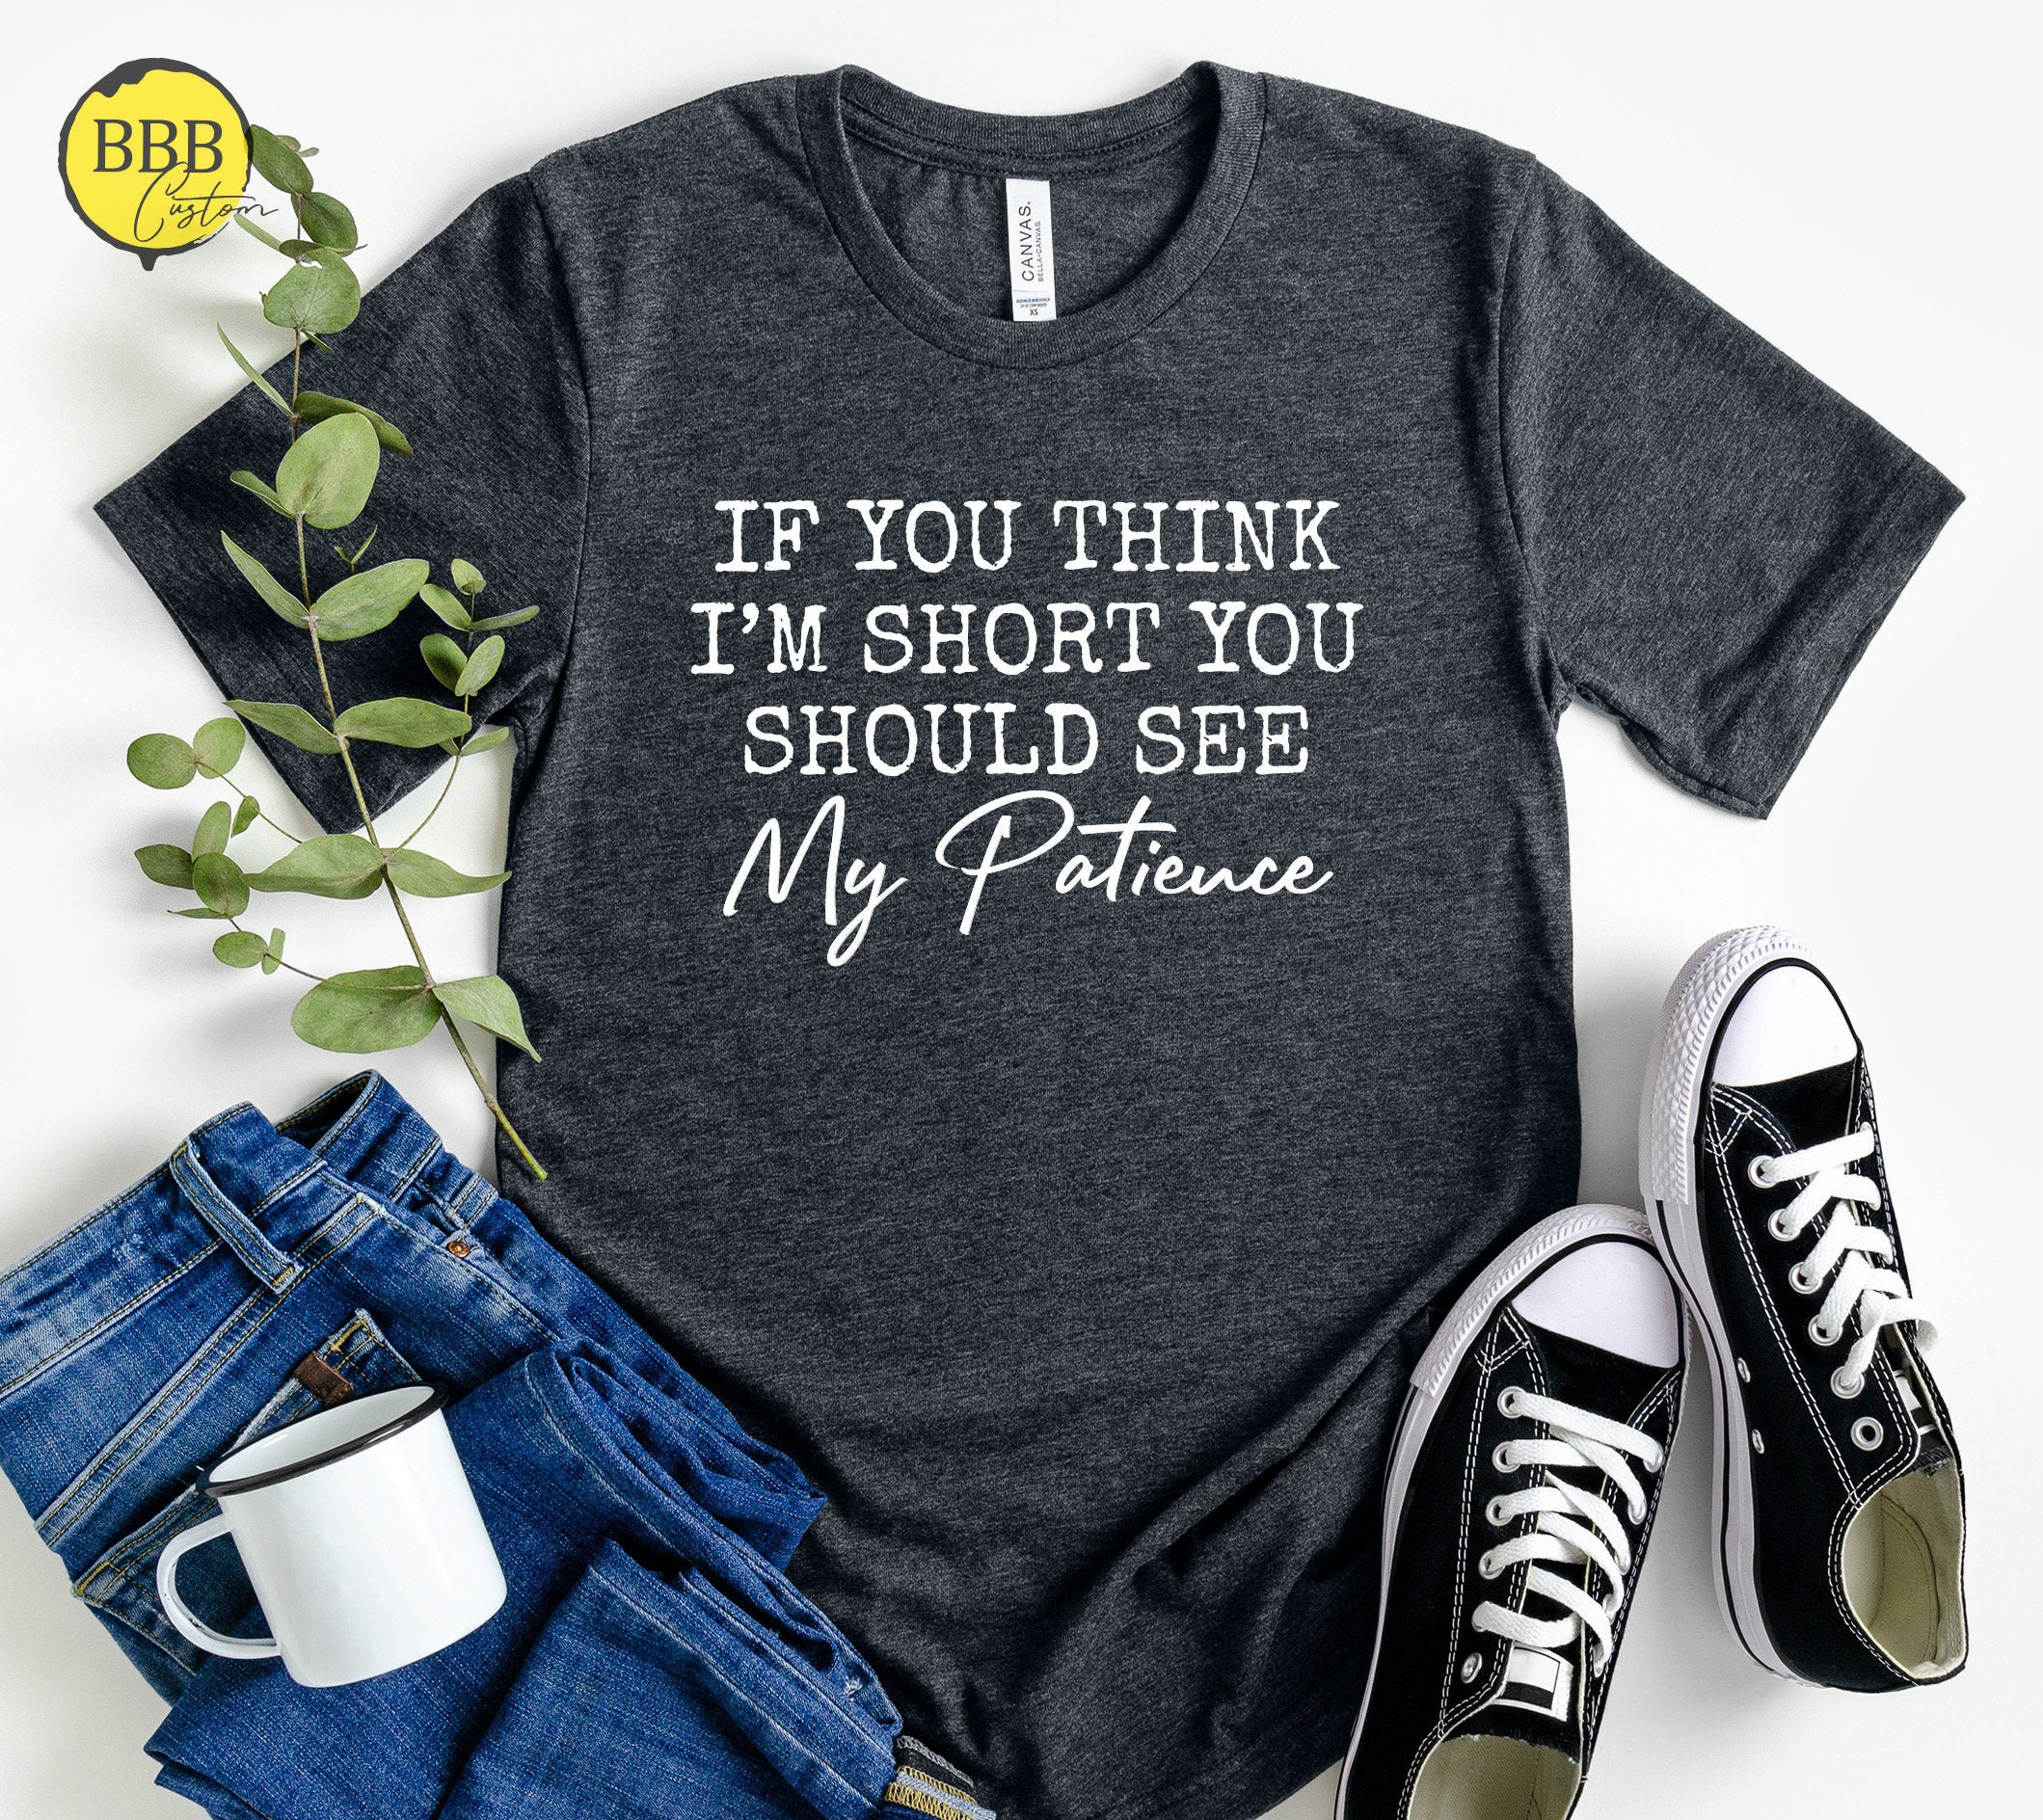 If You Think I'm Short You Should See My Patience, Sarcastic Shirt